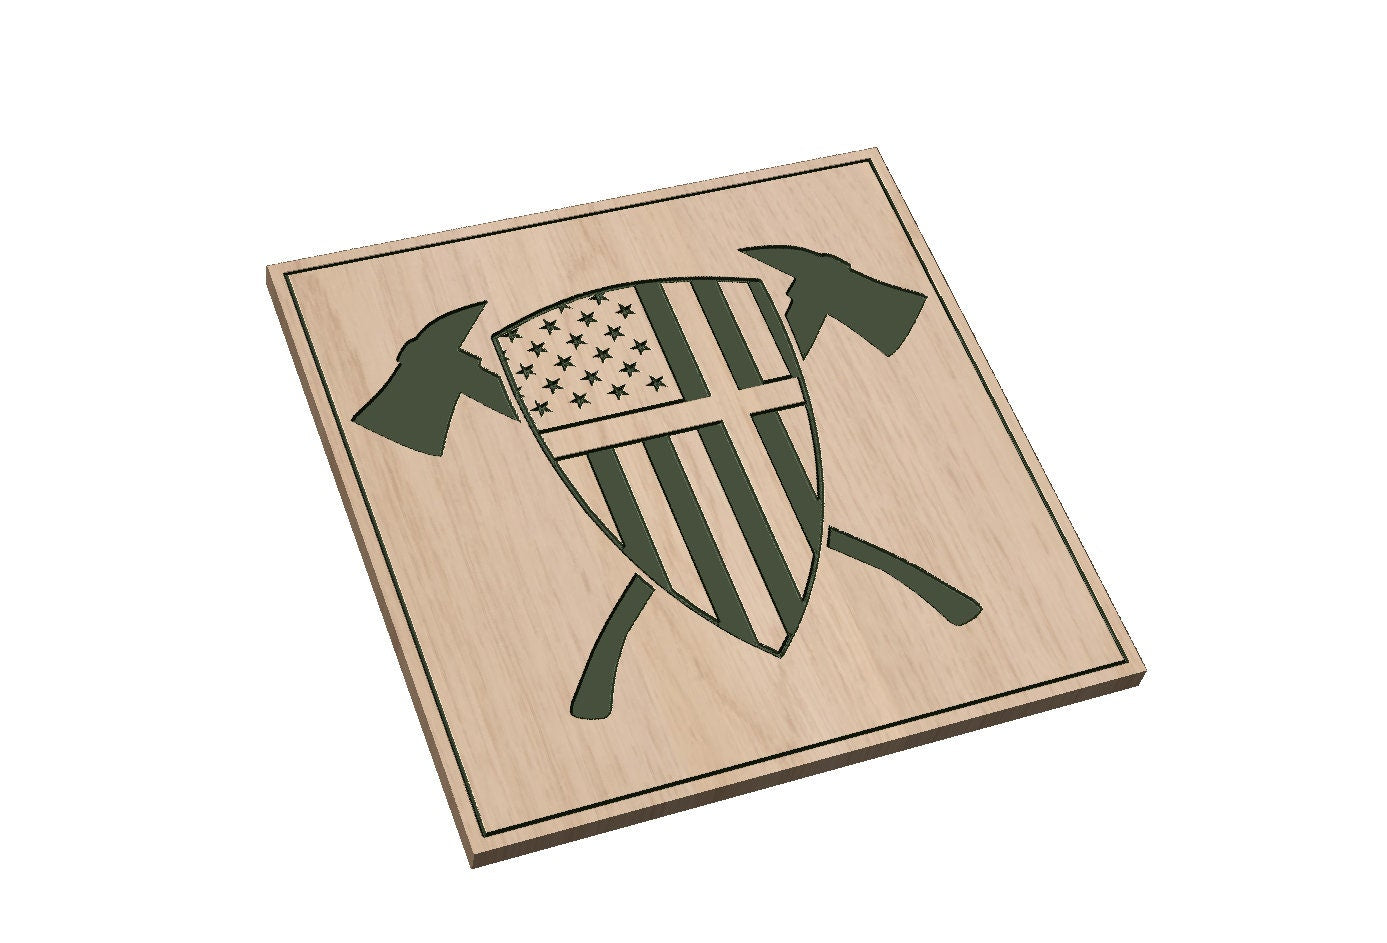 Cruisader Shield Flag Cross with Firefighter Axes